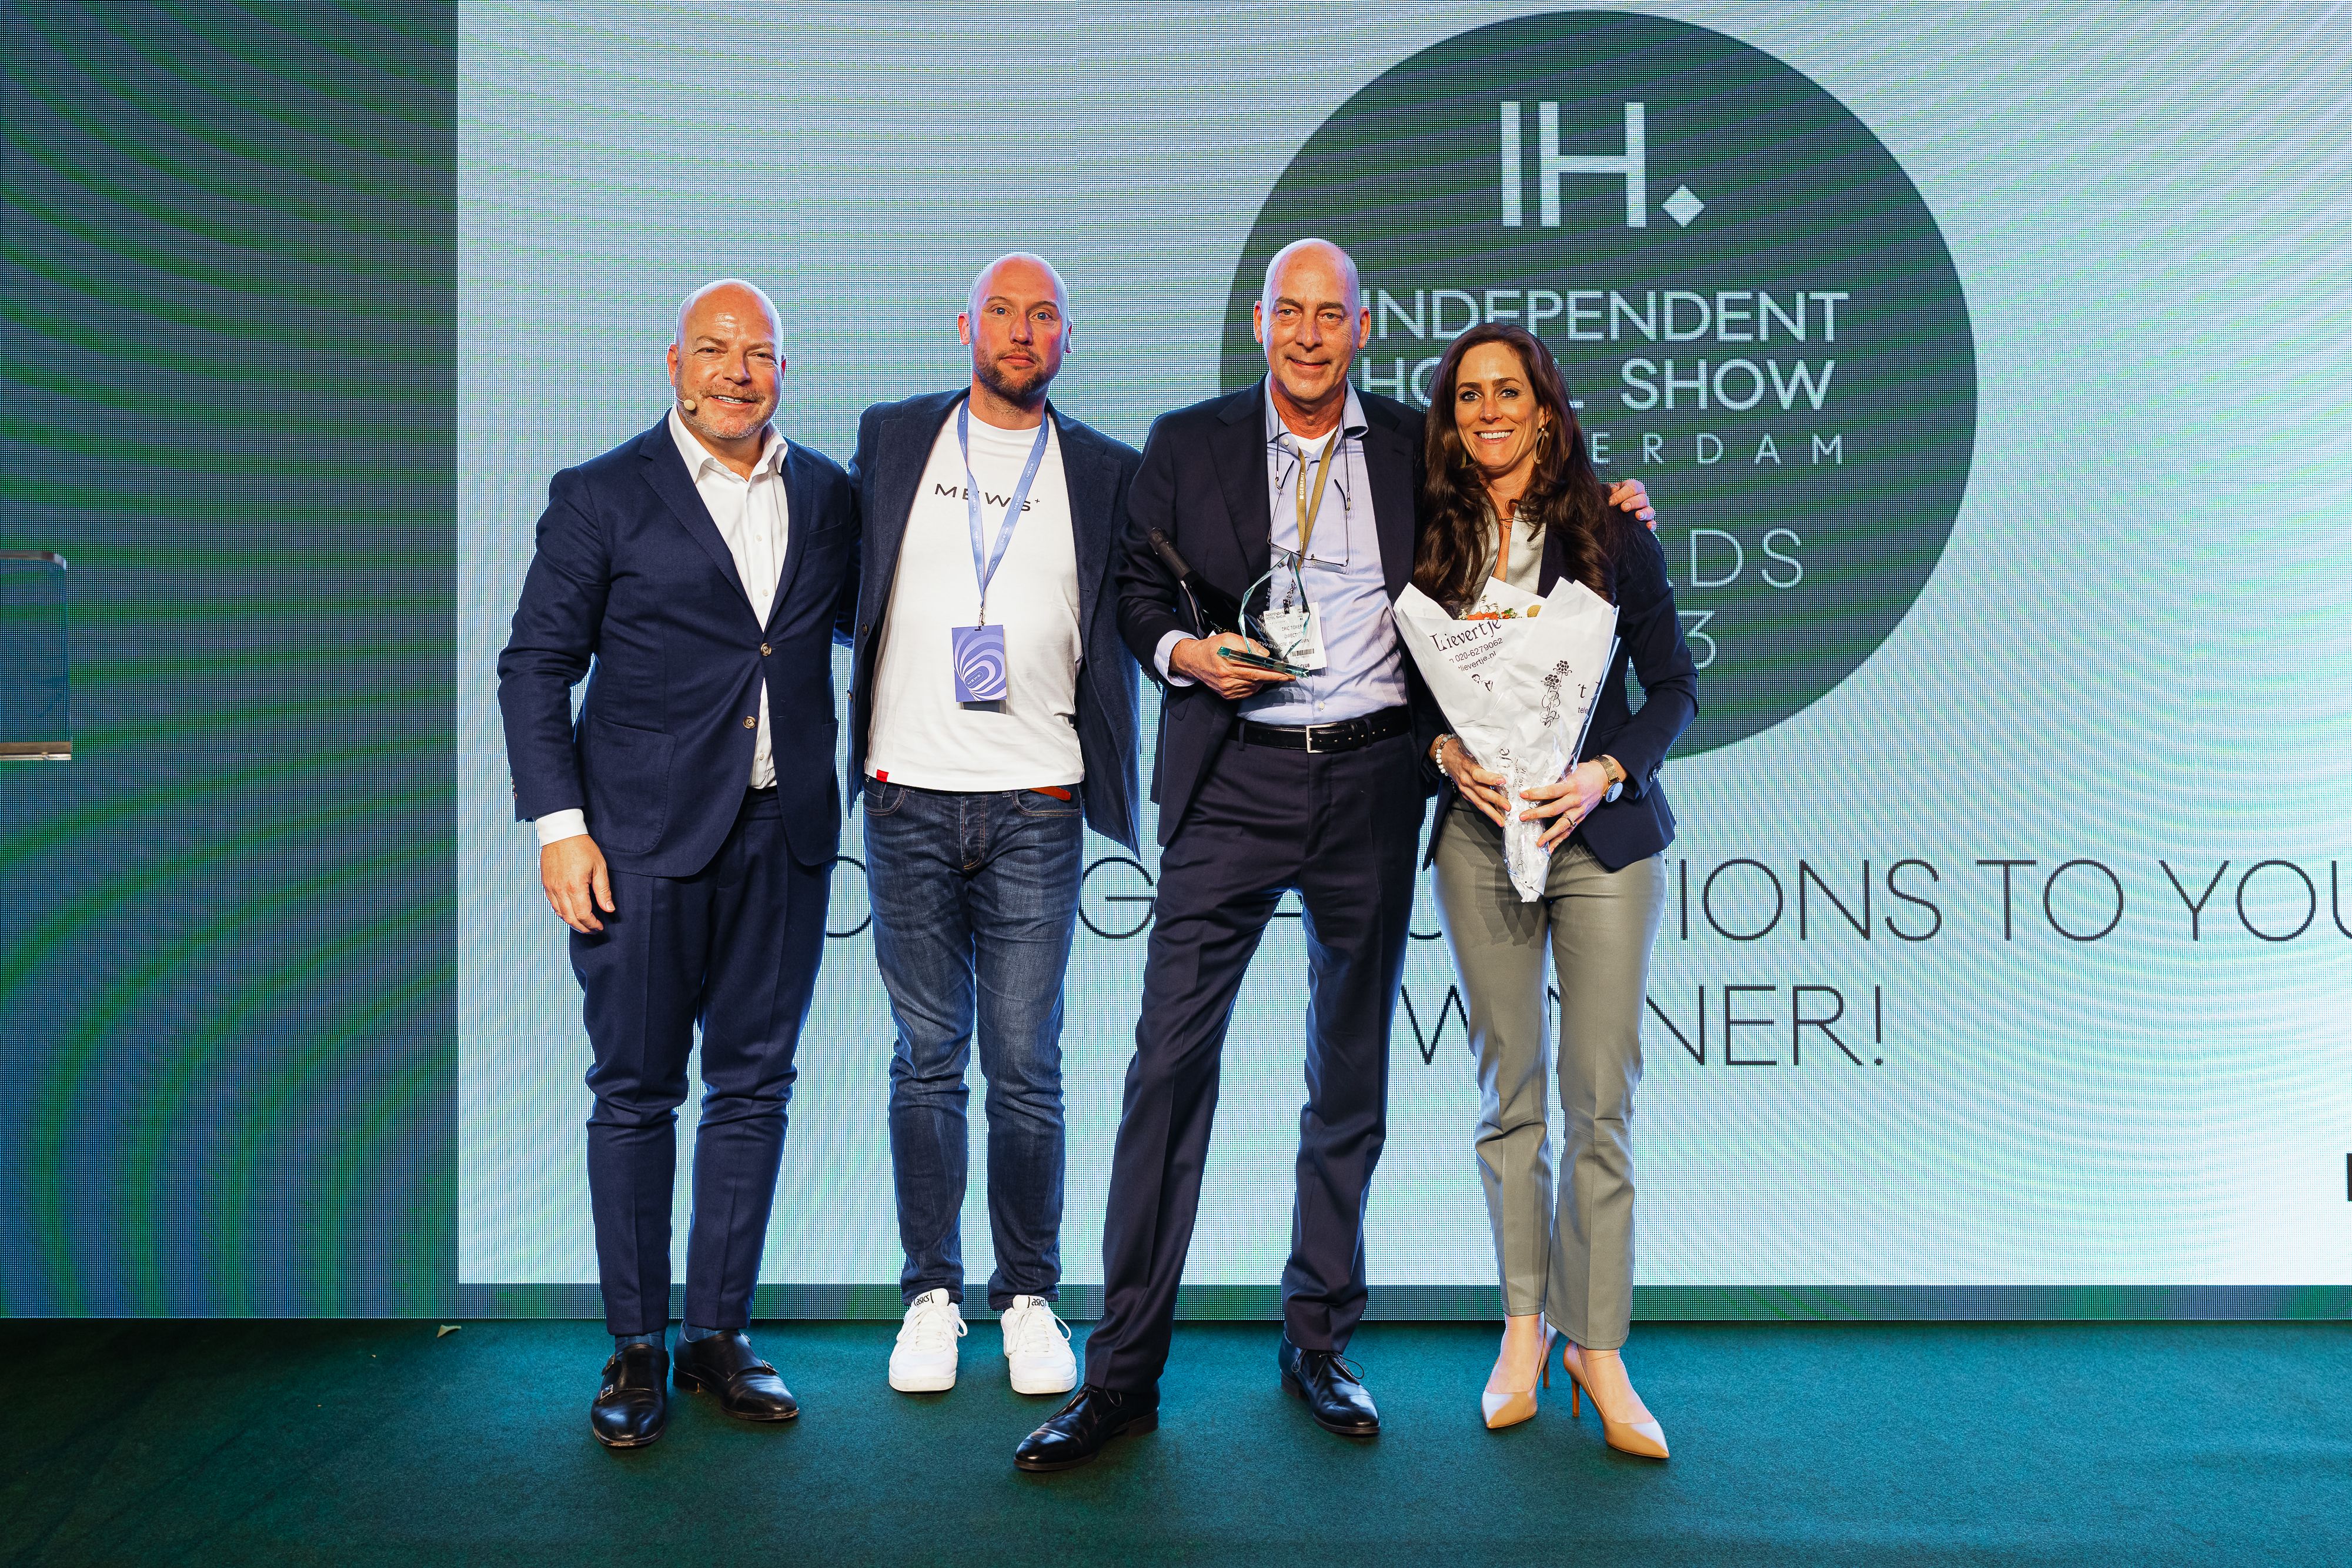 INDEPENDENT HOTEL SHOW AWARDS